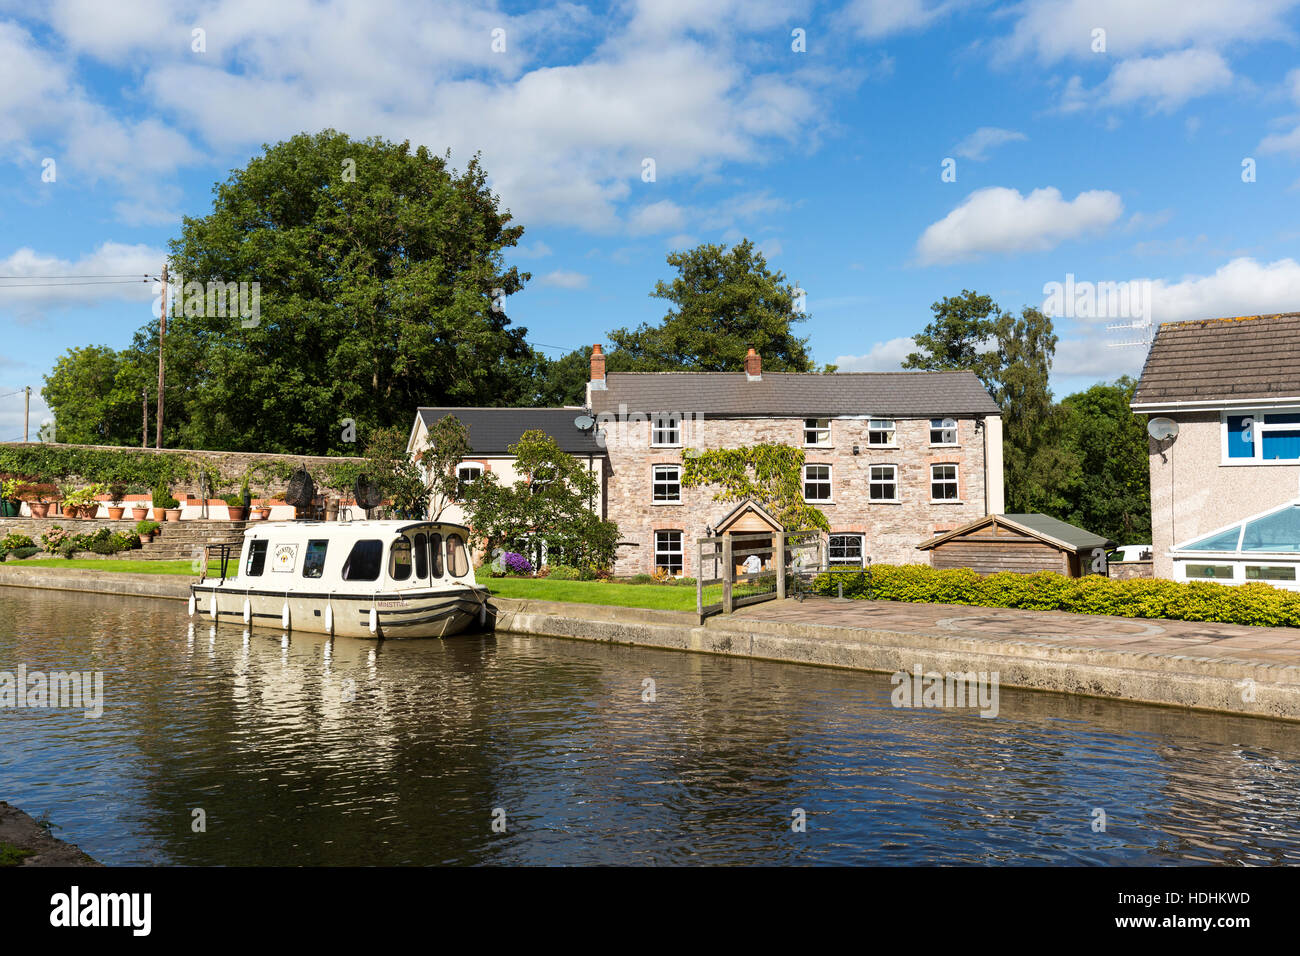 Boat moored in front of residential houses on the Brecon and Monmouth canal, Govilon, Wales, UK Stock Photo